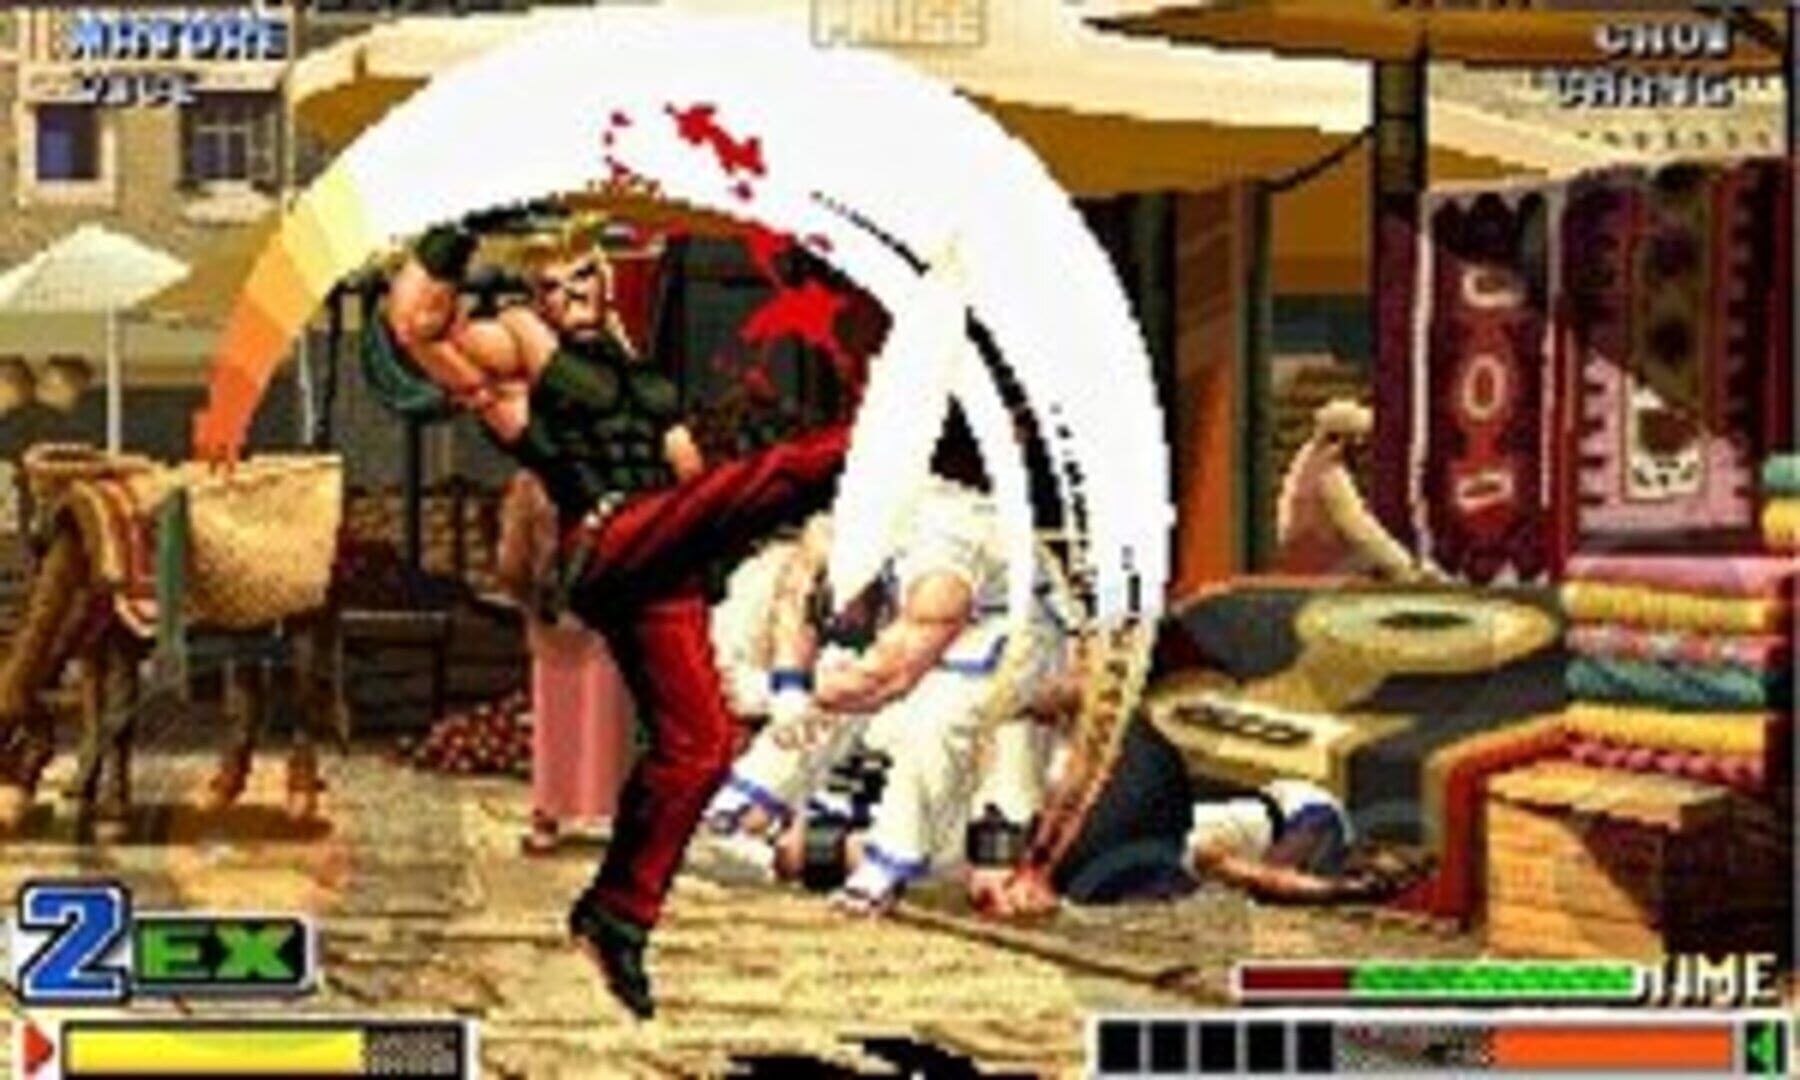 THE KING OF FIGHTERS '98 screenshots